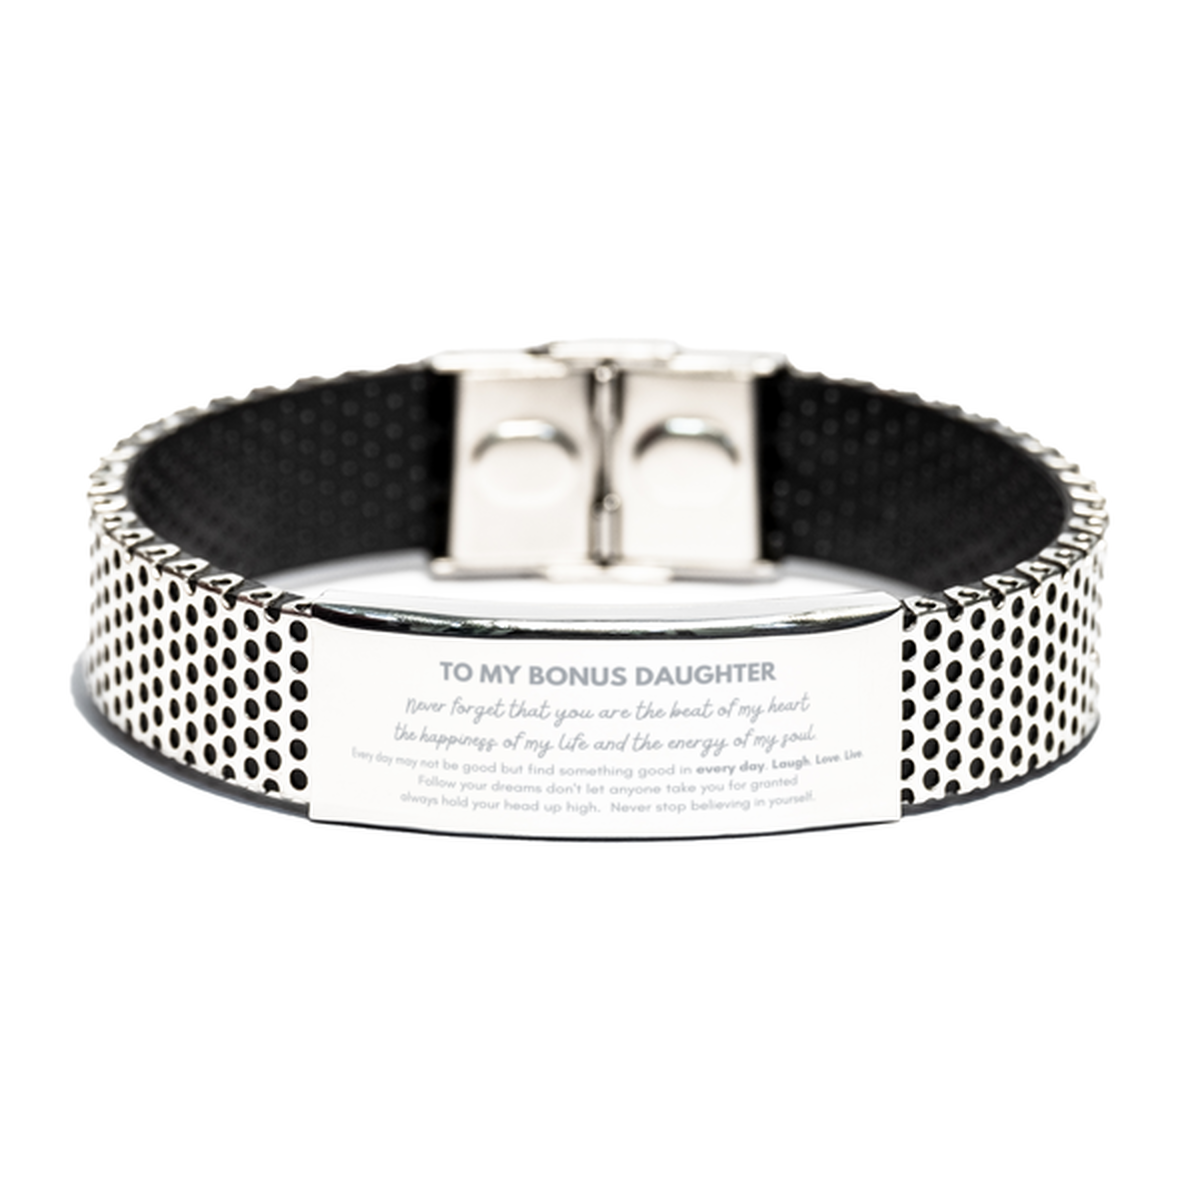 To My Bonus Daughter Bracelet Gifts, Christmas Bonus Daughter Stainless Steel Bracelet Present, Birthday Unique Motivational For Bonus Daughter, To My Bonus Daughter Never forget that you are the beat of my heart the happiness of my life and the energy of